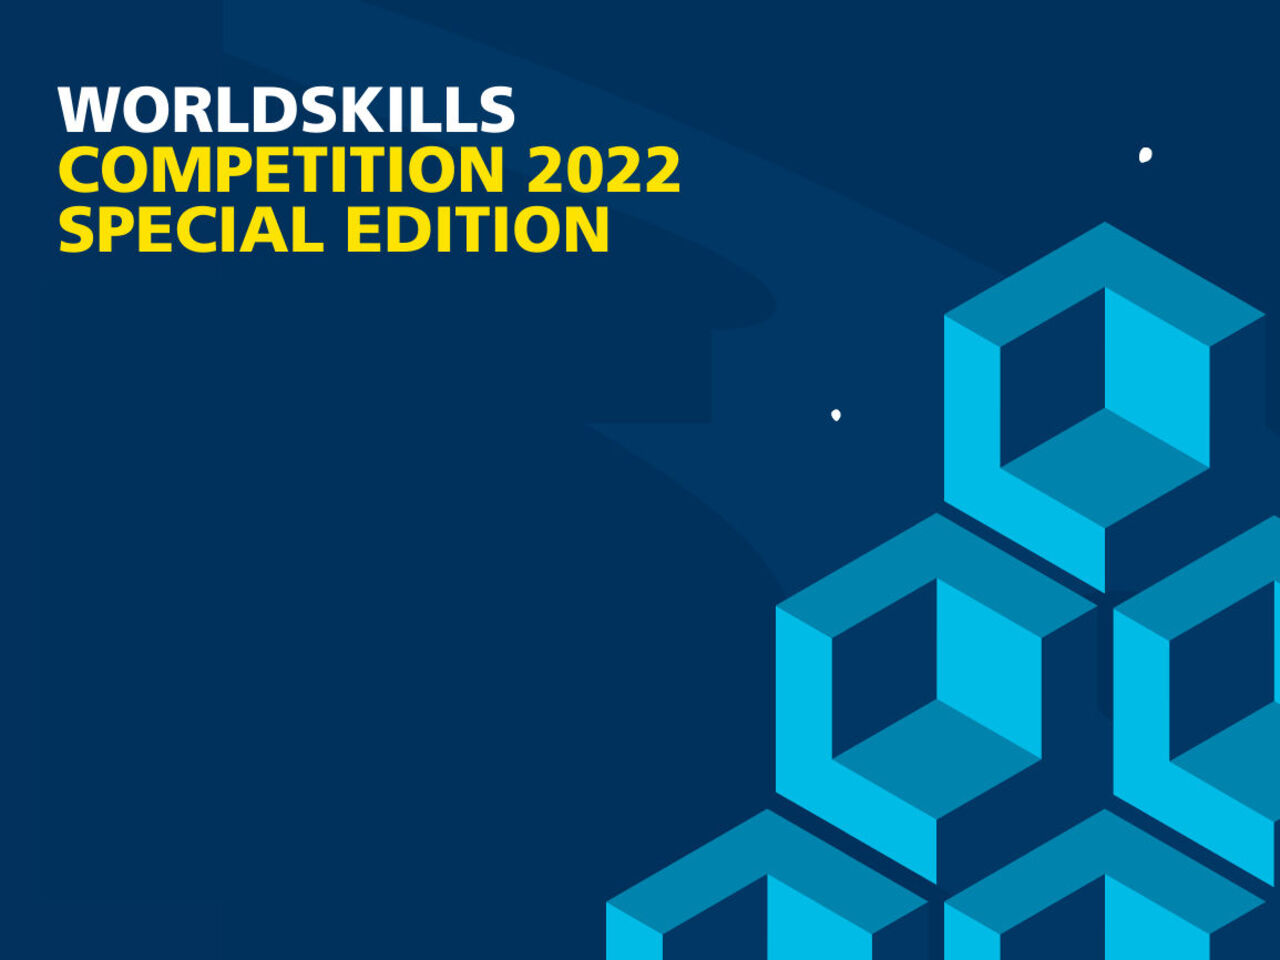 Host countries and regions prepare for WorldSkills Competition 2022 Special Edition